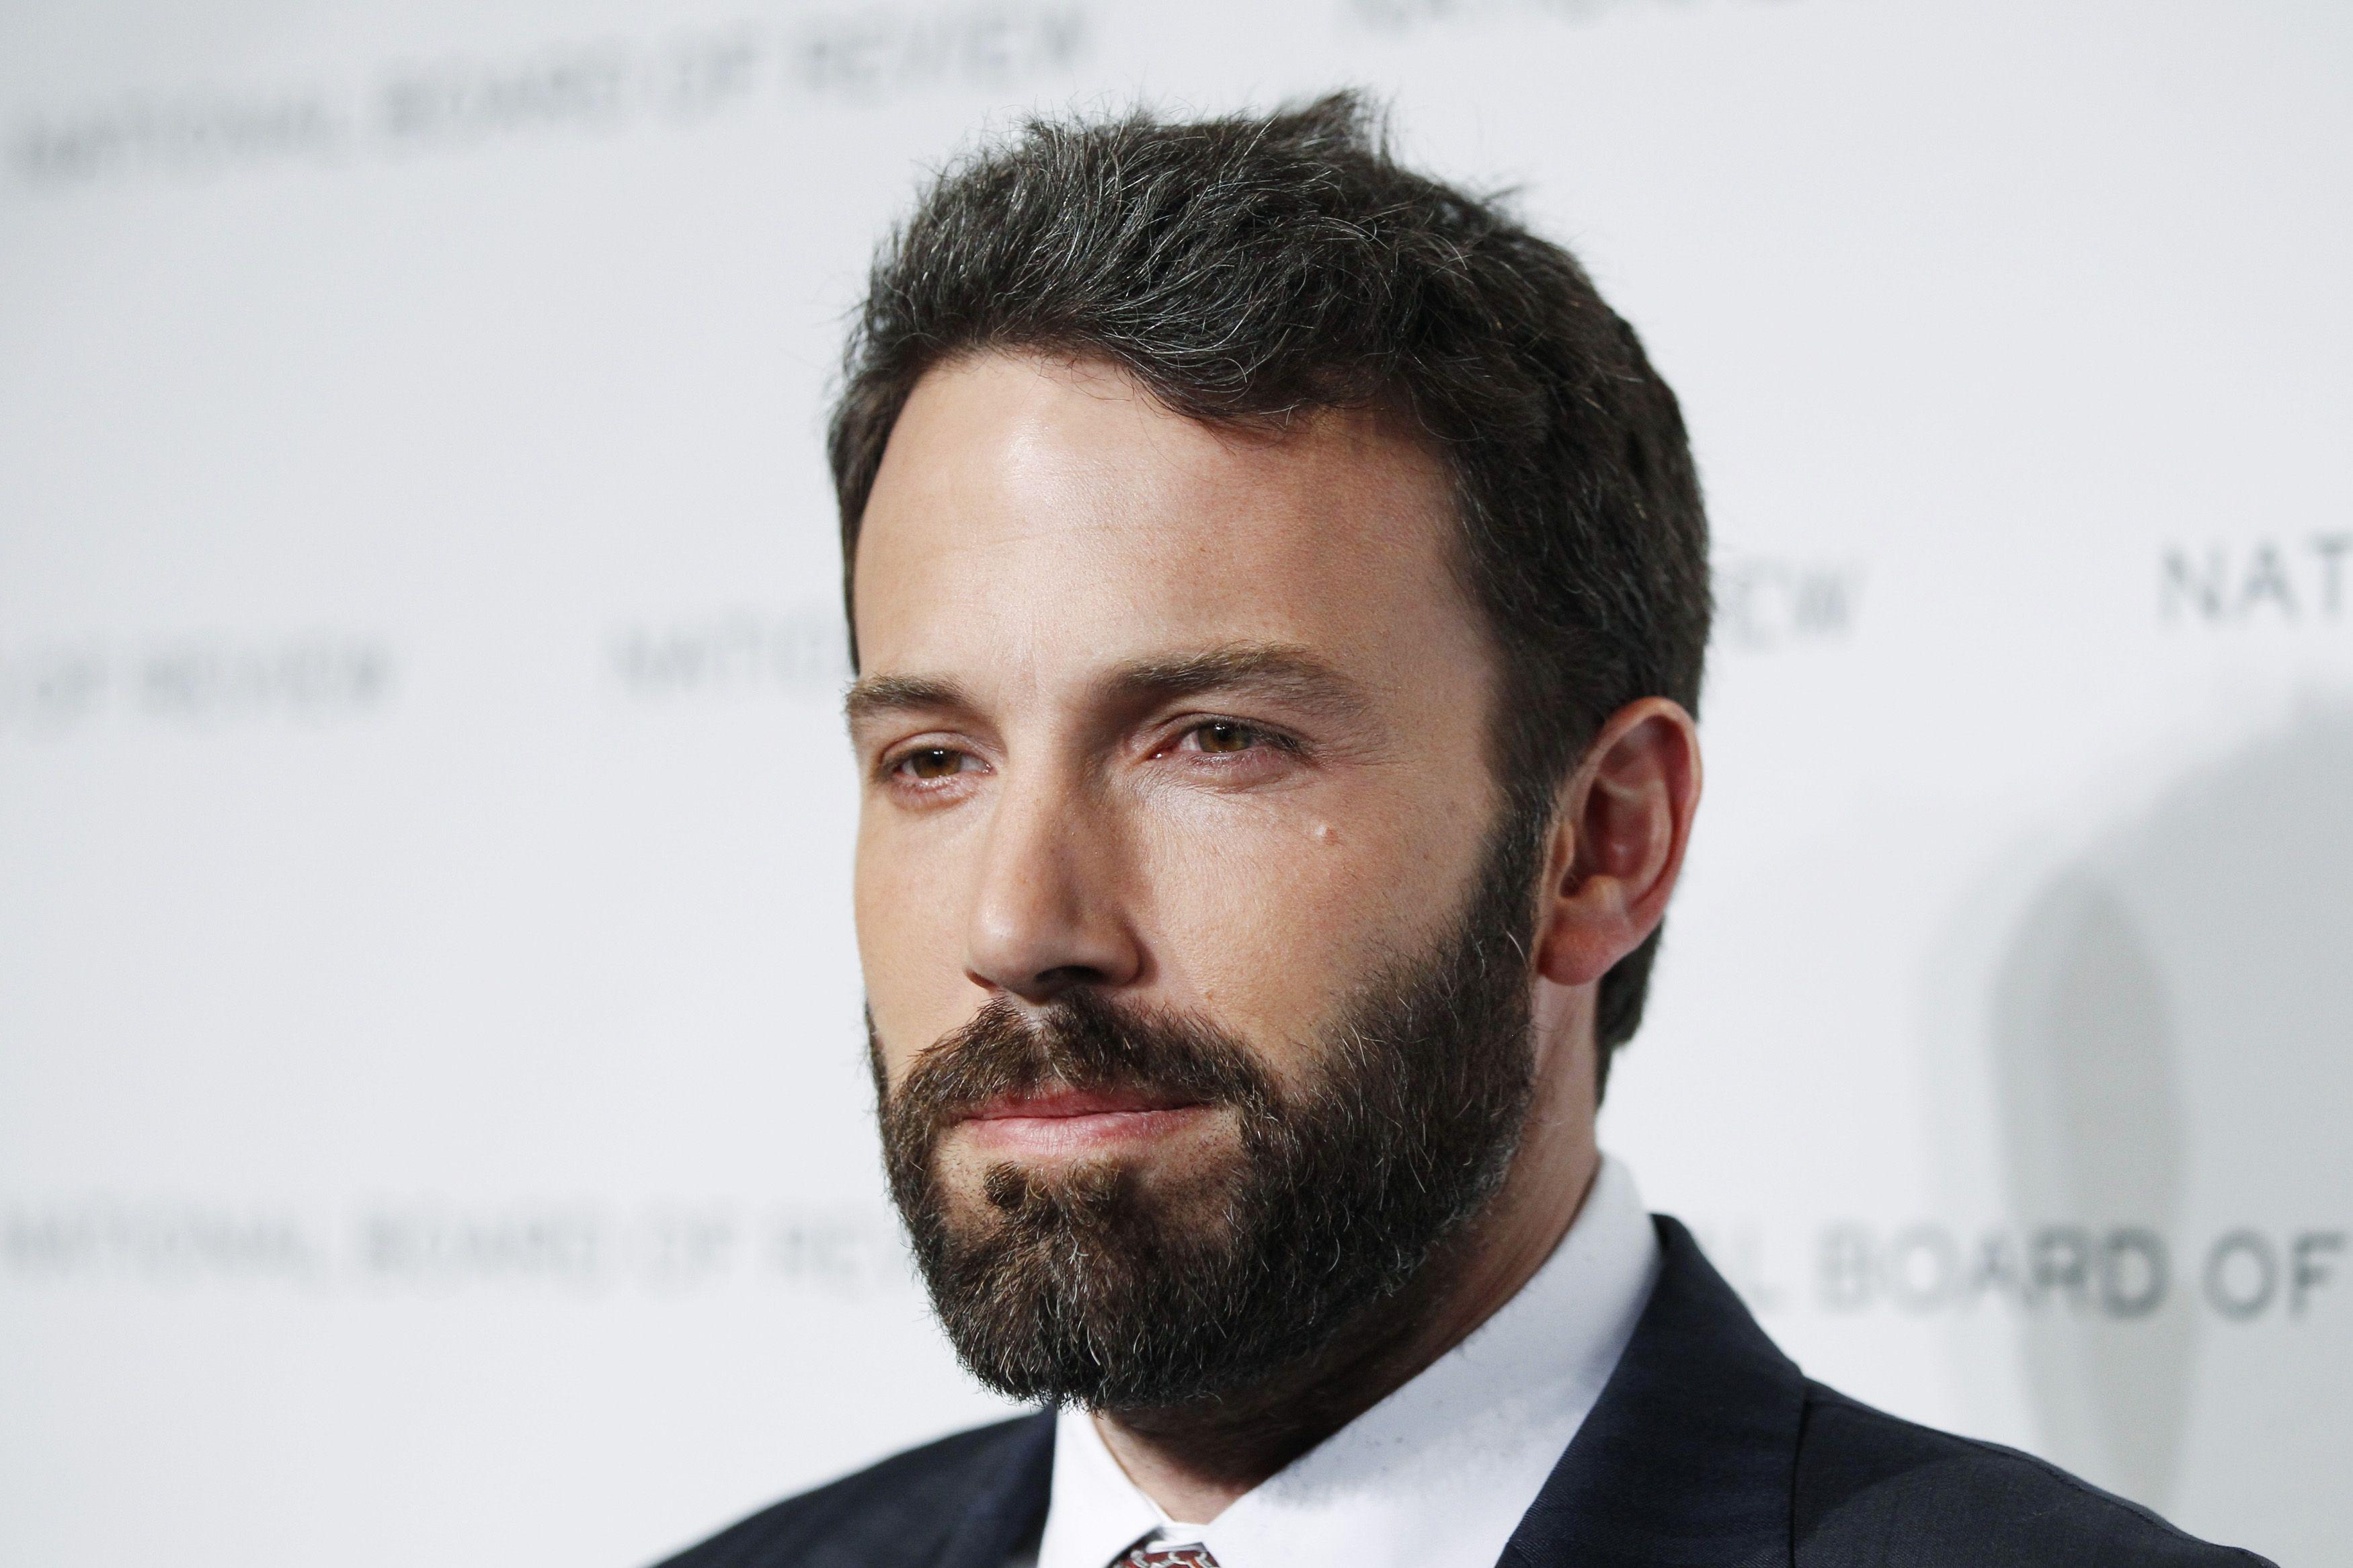 Ben Affleck Wallpaper High Resolution and Quality Download